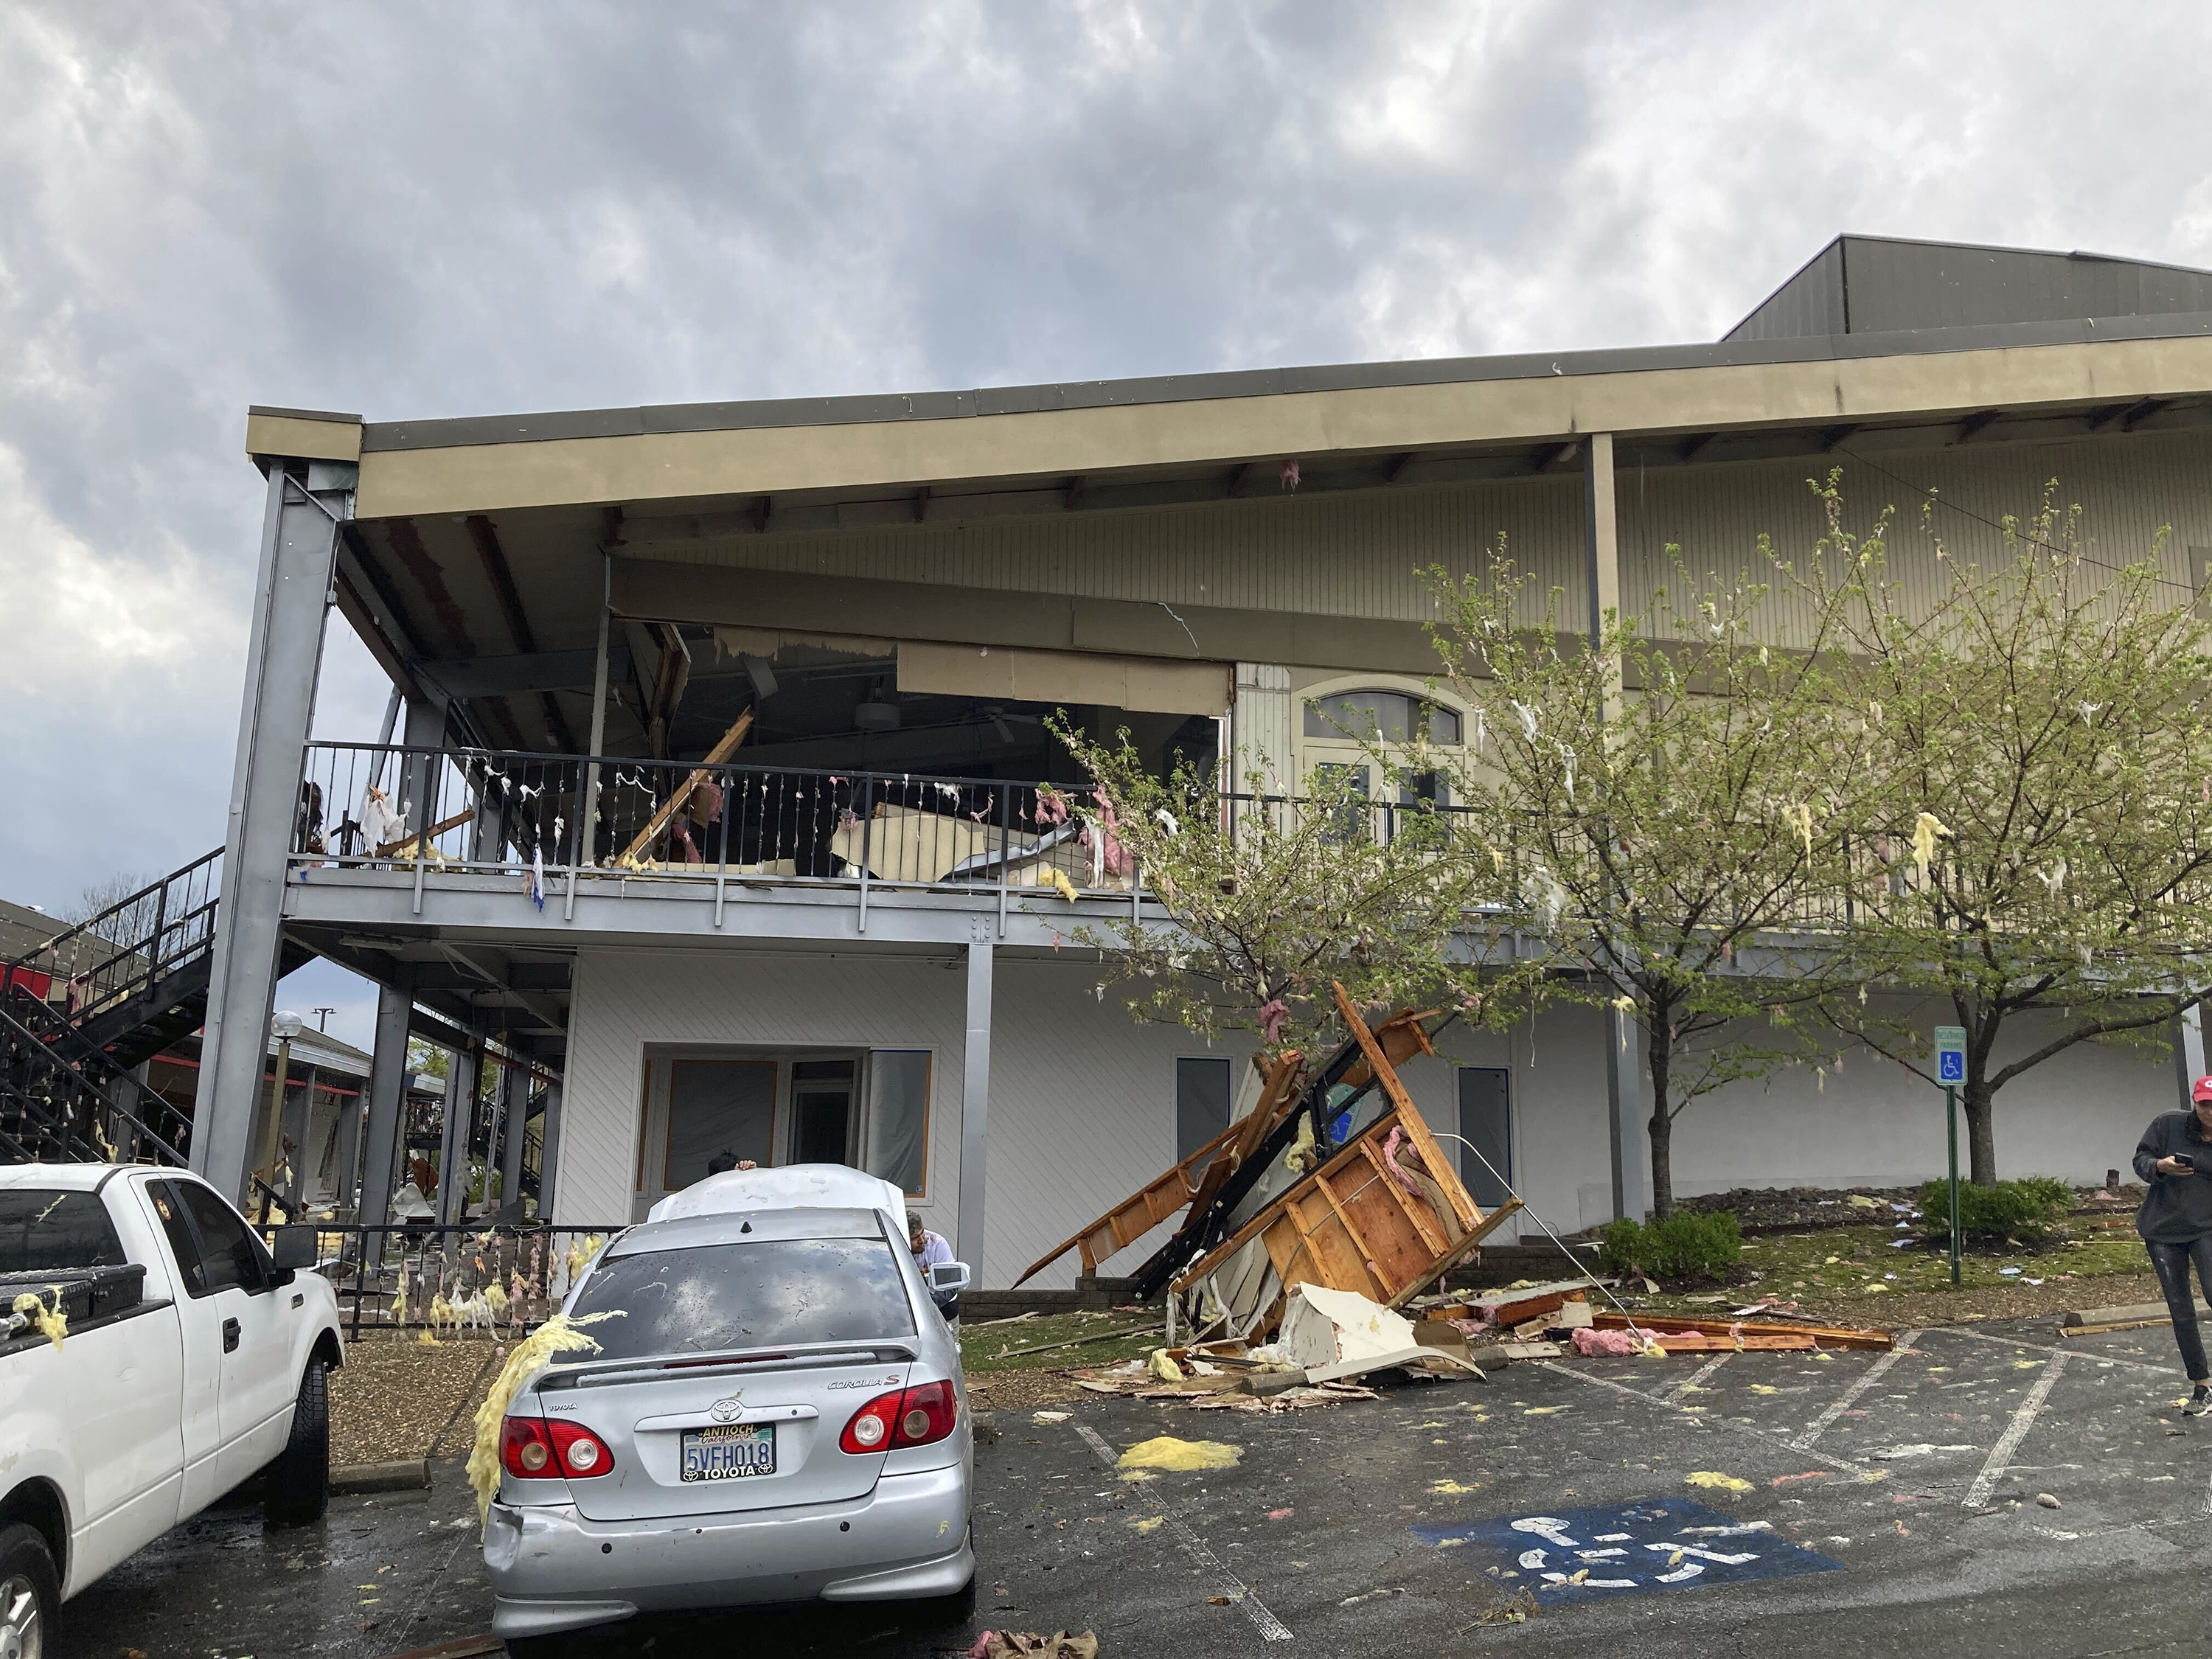 A building is damaged after a severe storm swept through Little Rock, Arkansas, Friday, March 31.